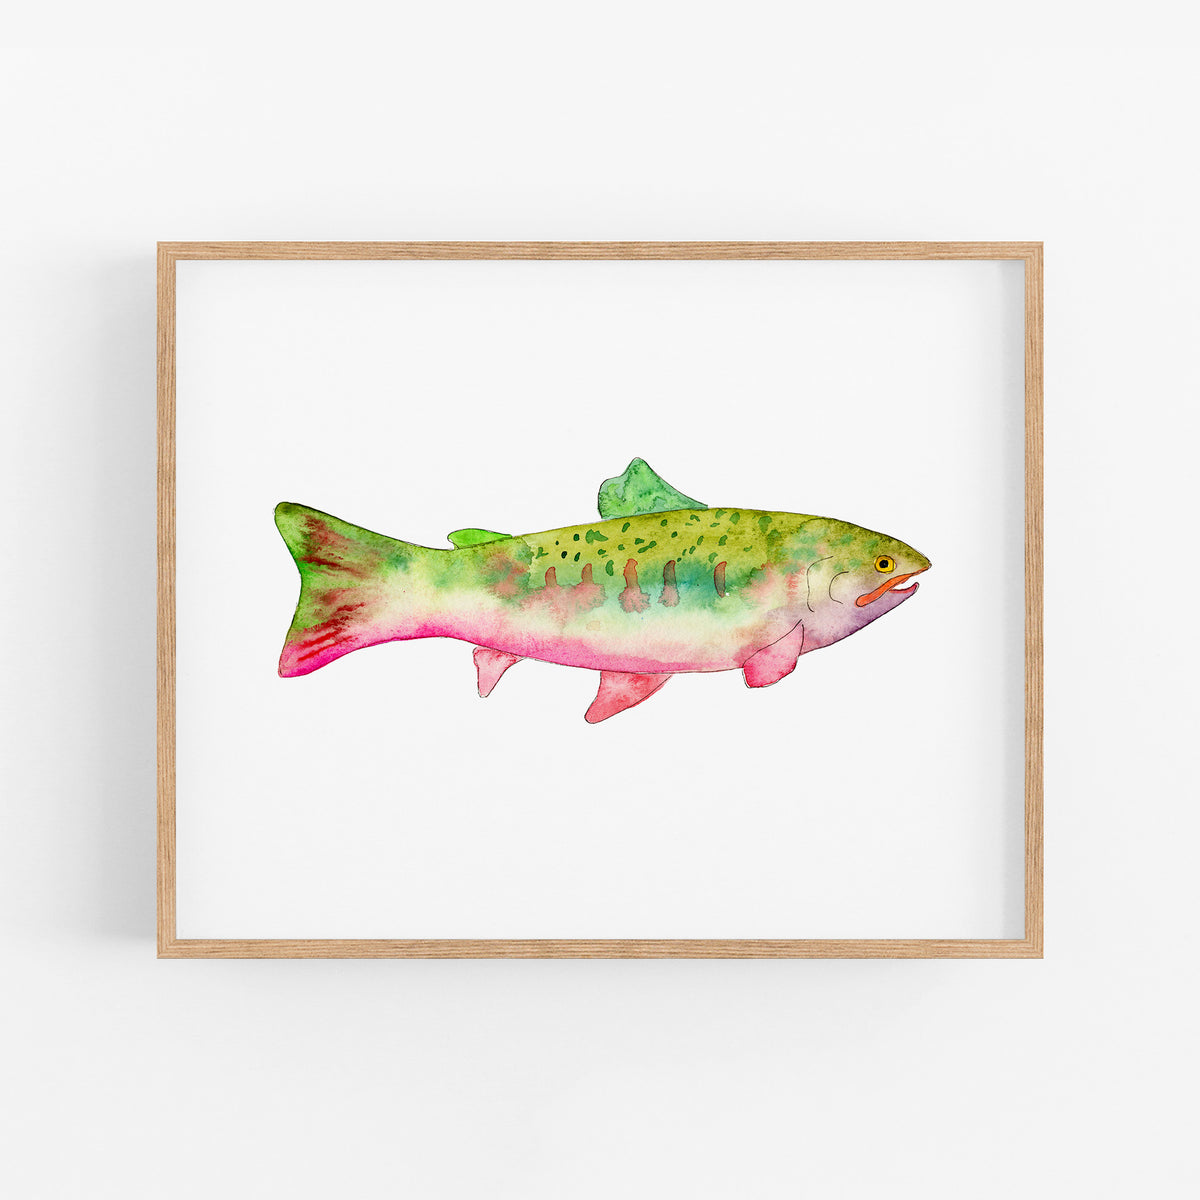 a painting of a rainbow colored fish on a white background